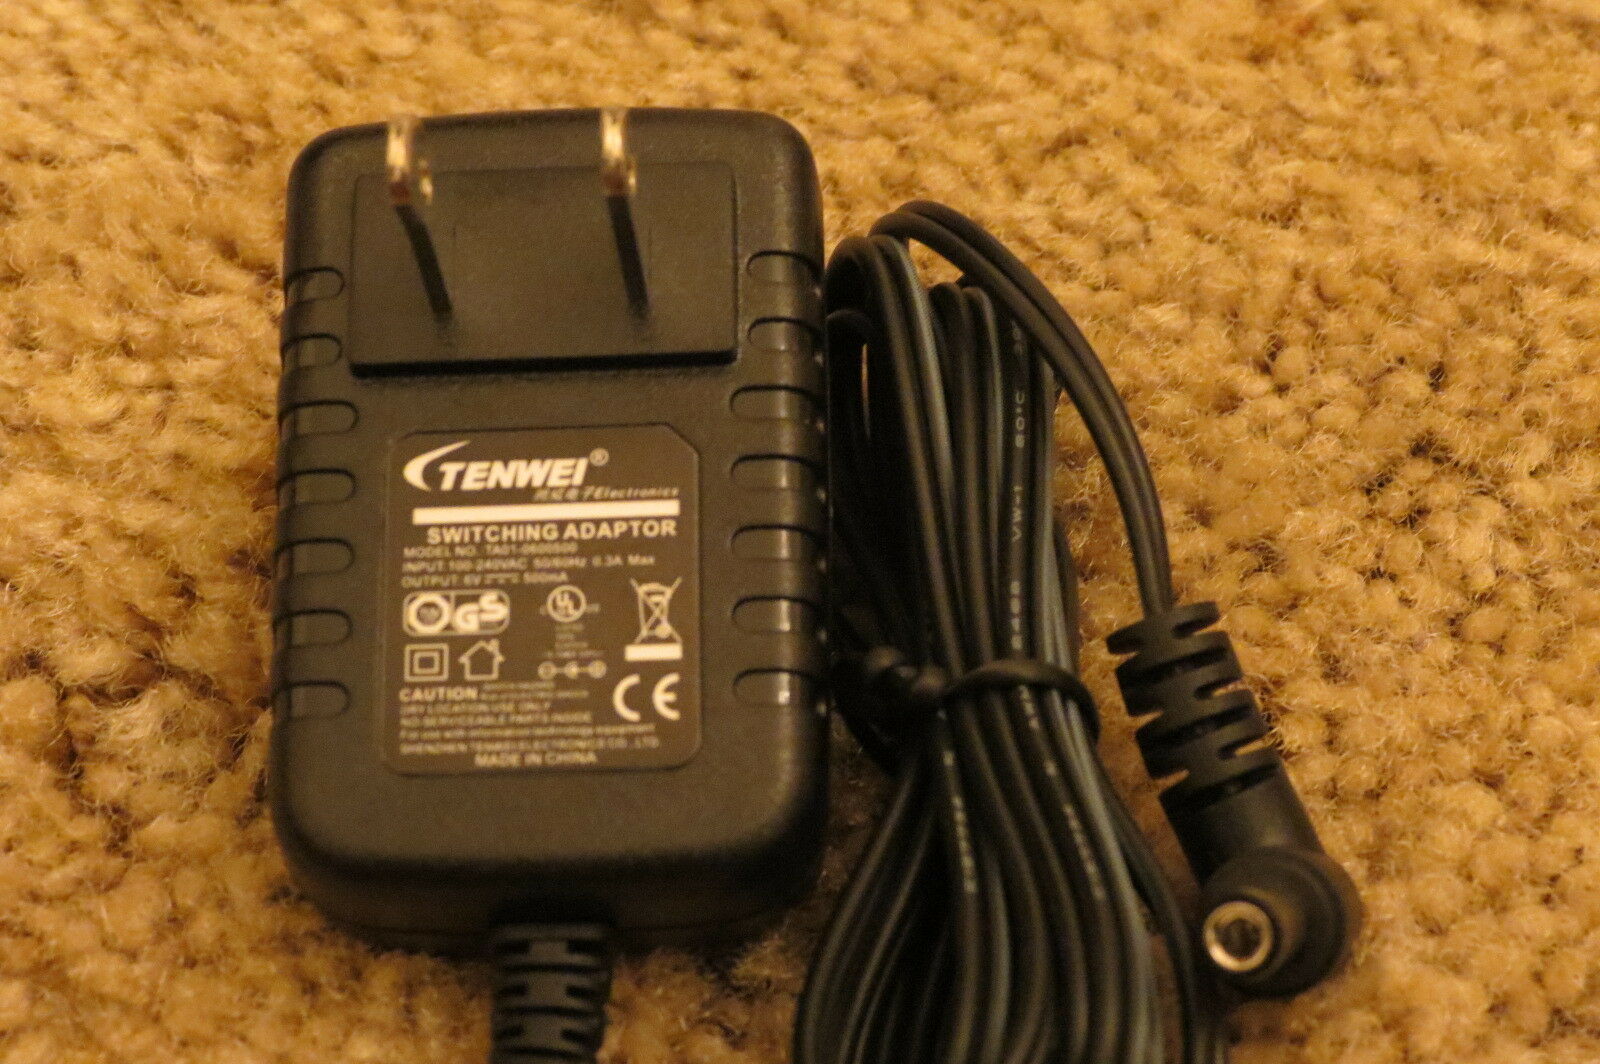 New TENWEI TD01-D600500 DC 6V 500mA Switching Power Supply Adapter - Click Image to Close